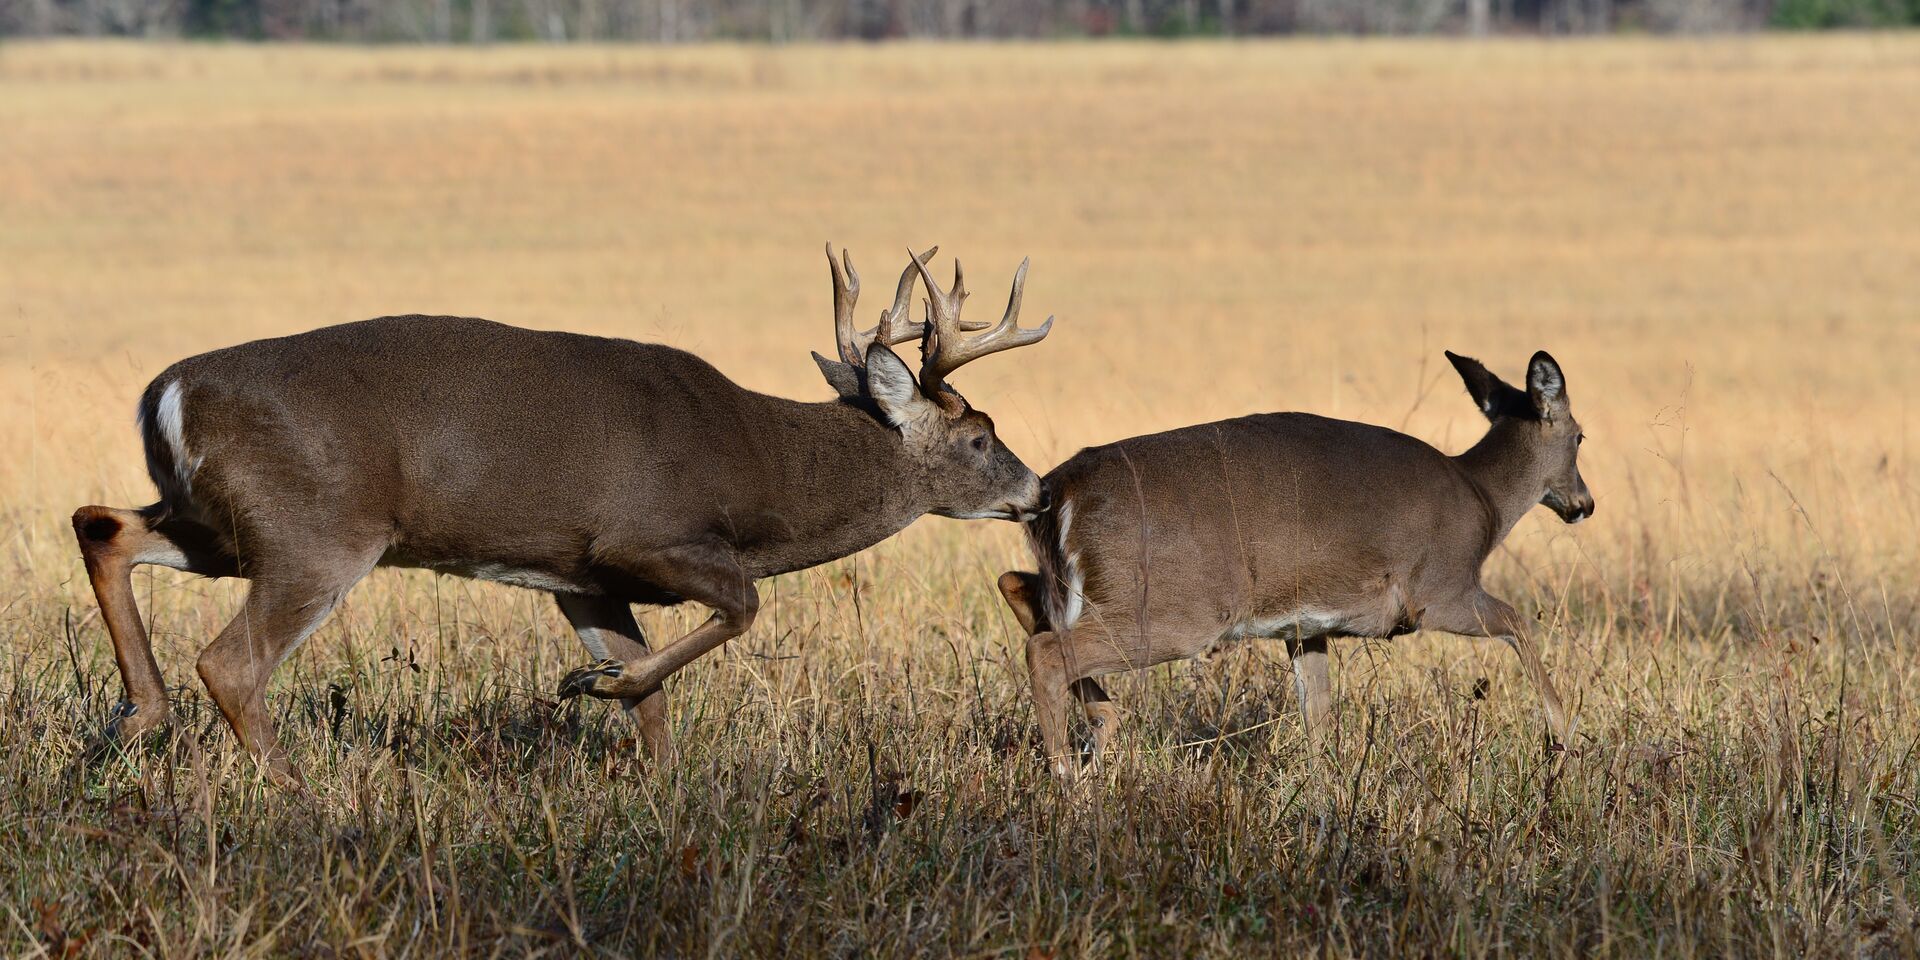 A buck chasing a doe in a field, whitetail rut activity. 